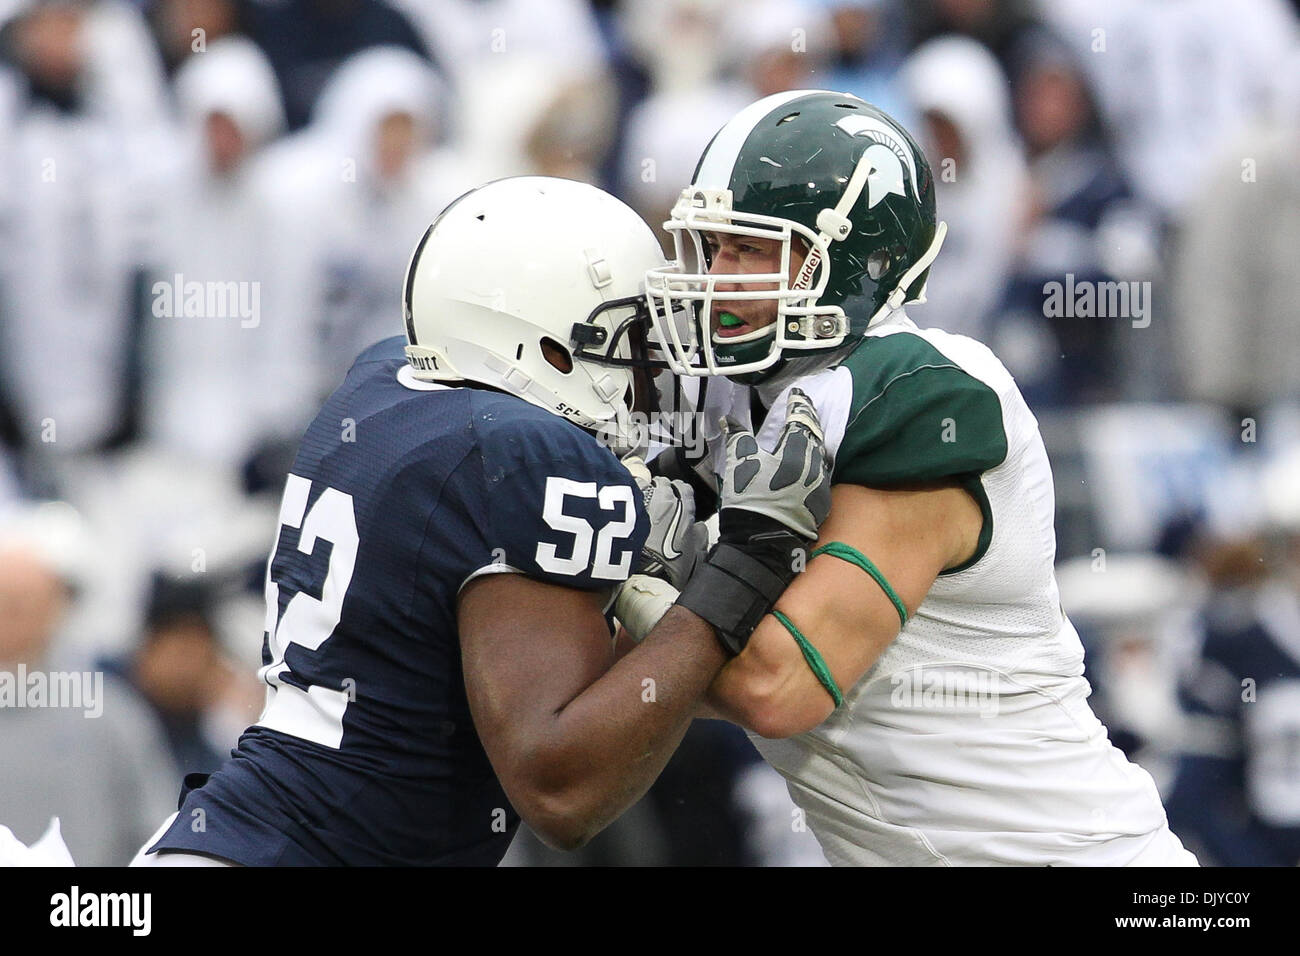 Nov. 27, 2010 - University Park, Pennsylvania, United States of America - Penn State Nittany Lions offensive tackle Chimaeze Okoli (52) and Michigan State Spartans defensive end Tyler Hoover (91) during the Penn State Nittany Lions and the Michigan State Spartans game at Beaver Stadium in University Park, Pennsylvania. (Credit Image: © Alex Cena/Southcreek Global/ZUMAPRESS.com) Stock Photo